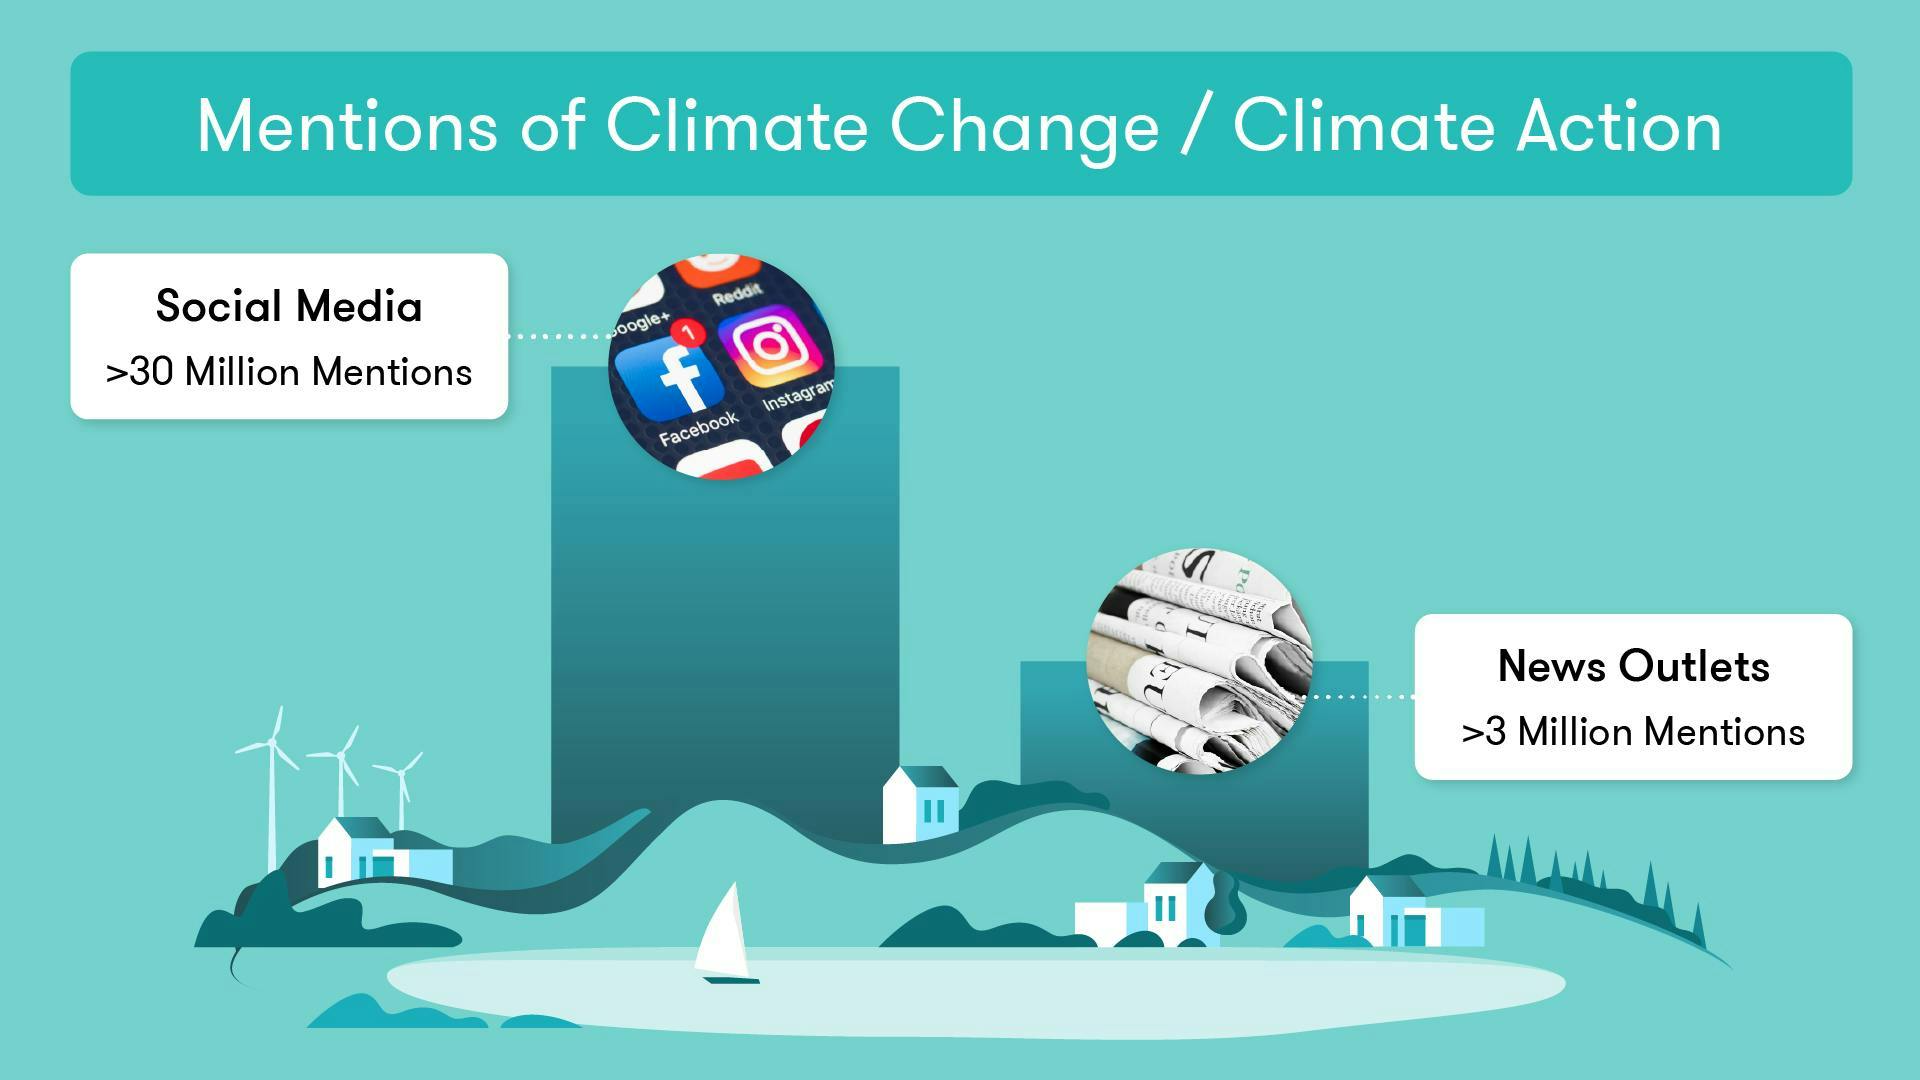 Climate action mentions on social media and news this year